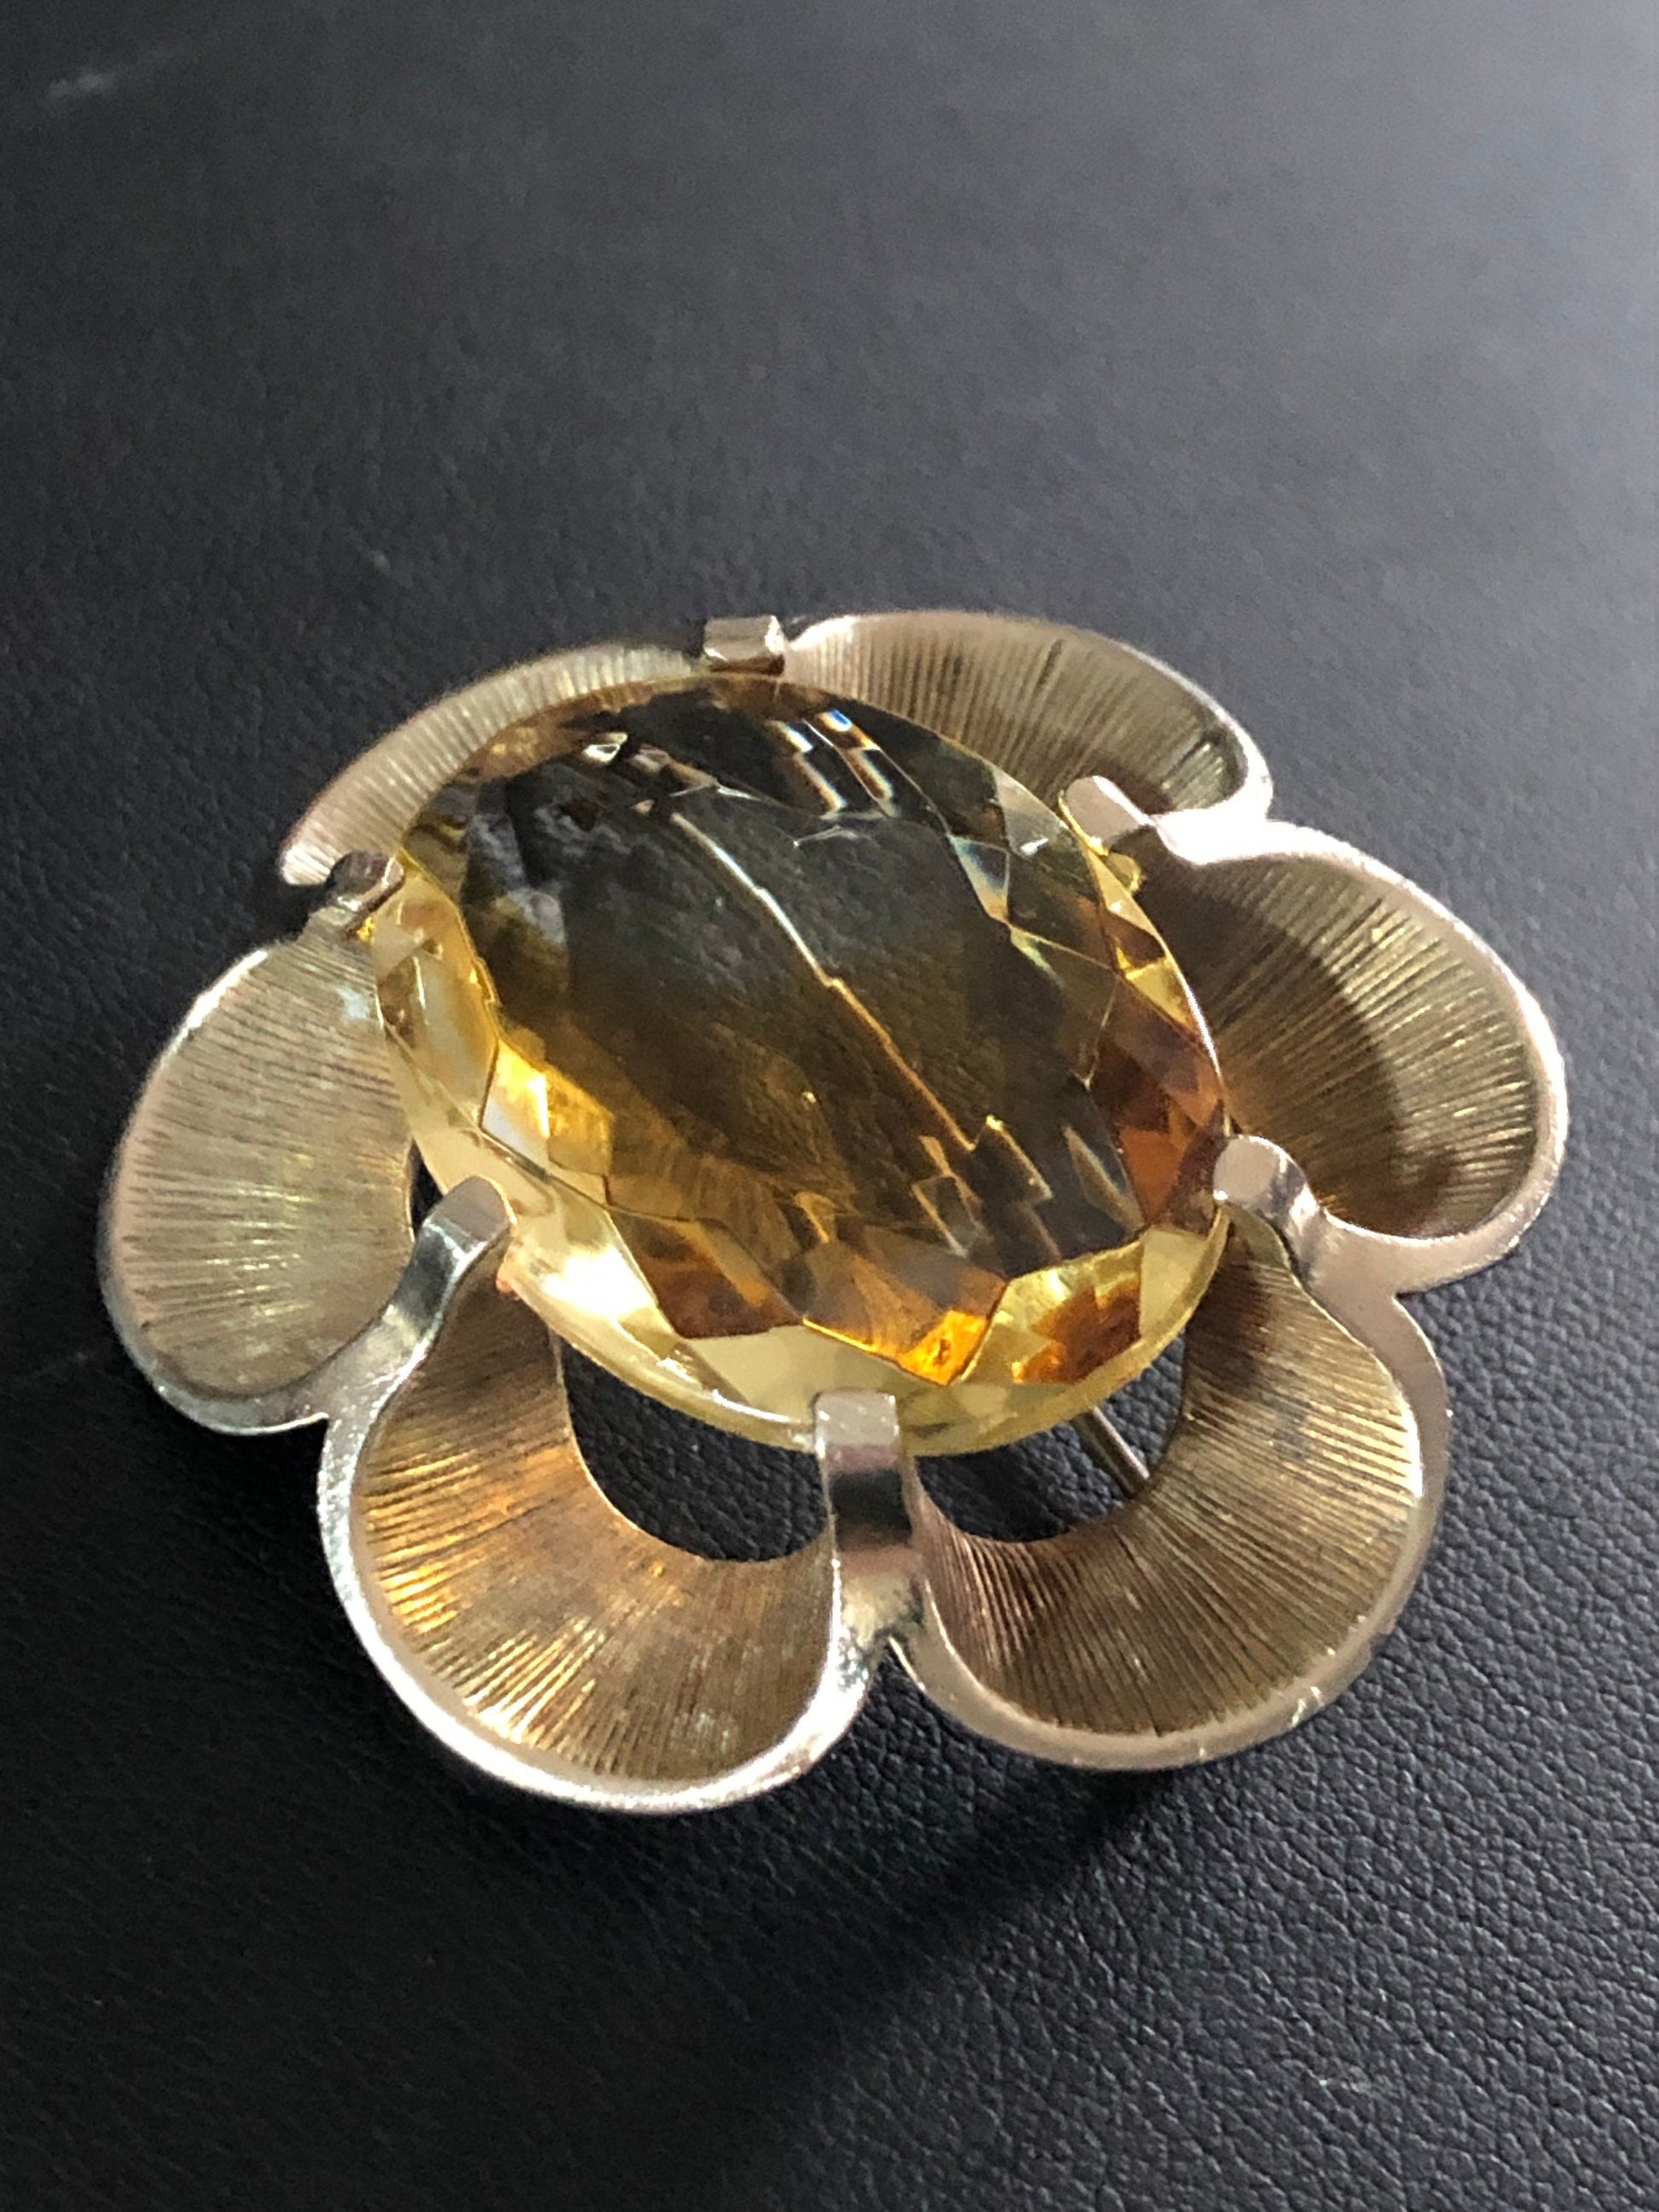 Signed EXQUISITE brooch with large pale yellow citrine glass faceted cabochon oversized chunky gold tone